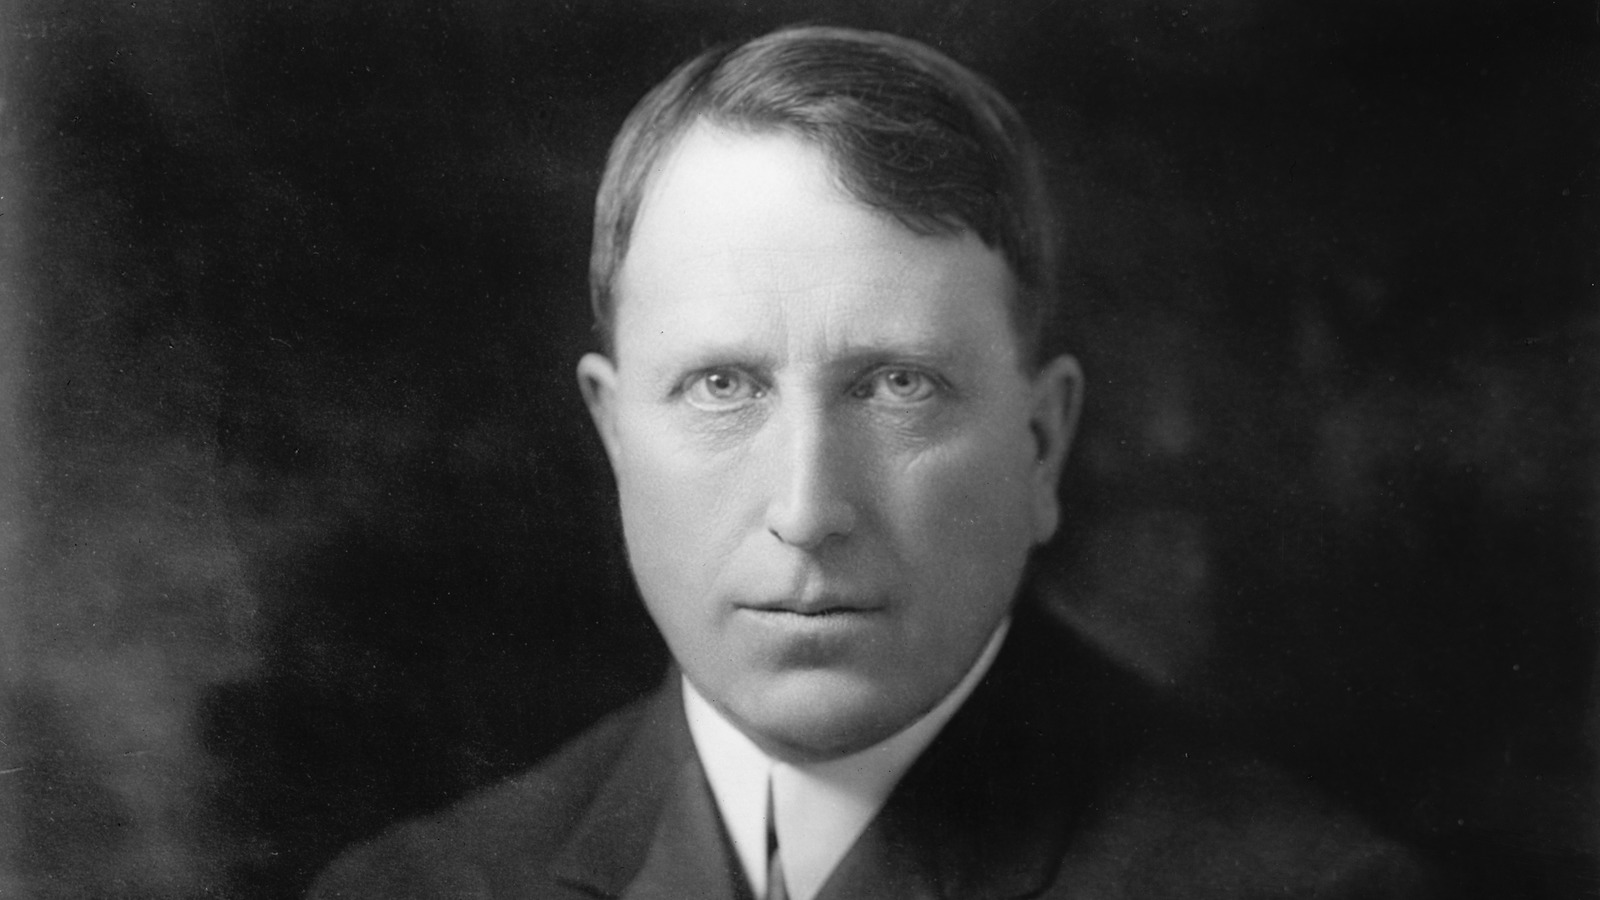 William Randolph Hearst printing anti-cannabis propaganda to squash the expansion of hemp that directly competed with his business. Think of all the people jailed and lives ruined. Not to mention all the applications, medical and technological, that were halted.

-u/Bigstar976